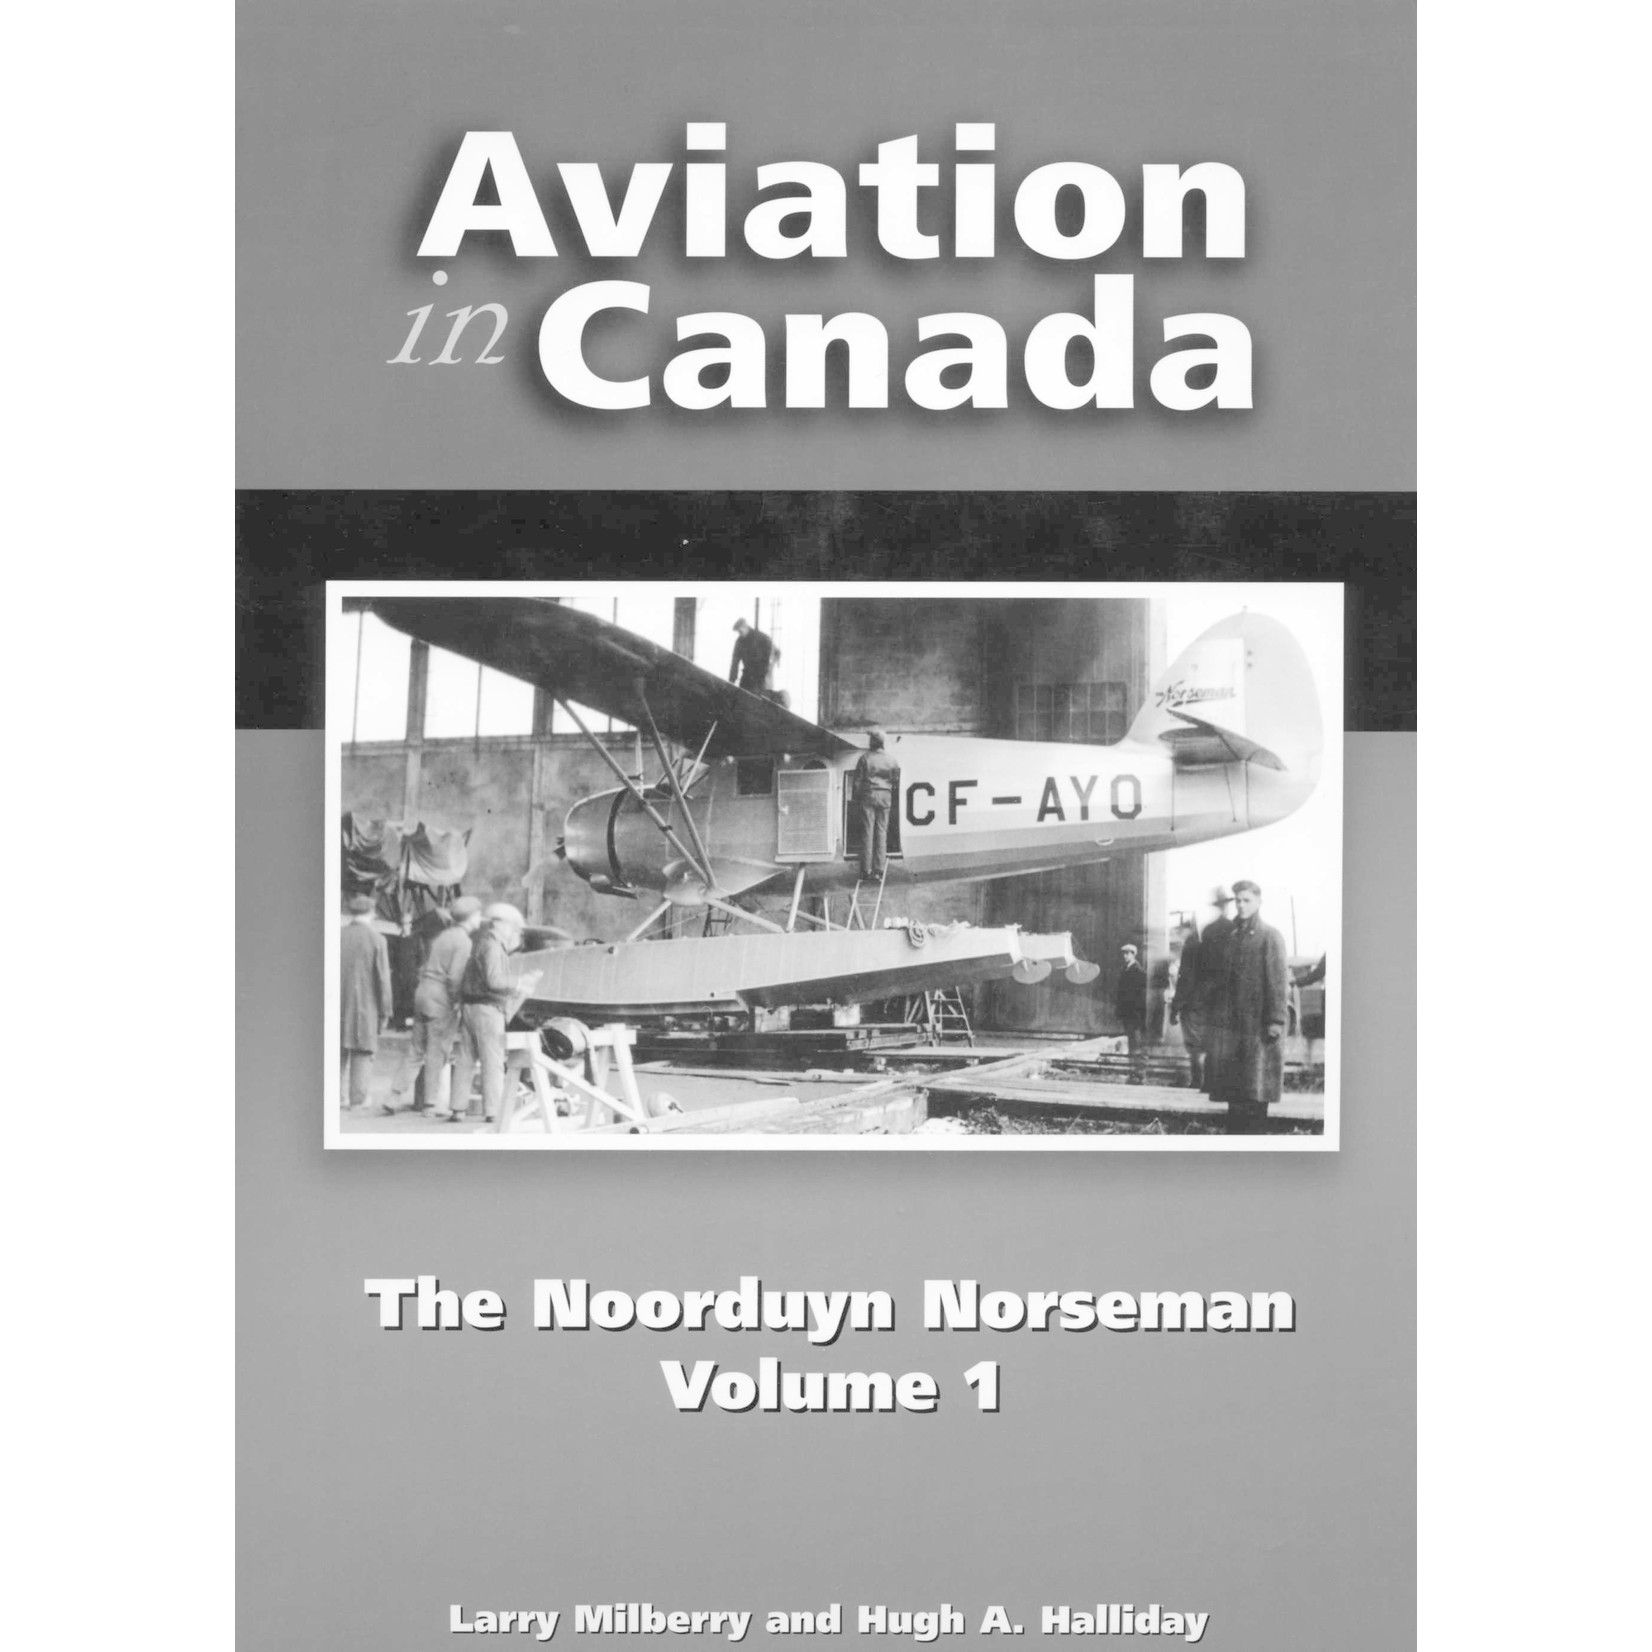 Aviation and Space Aviation in Canada - The Noorduyn Norseman, Vol.1